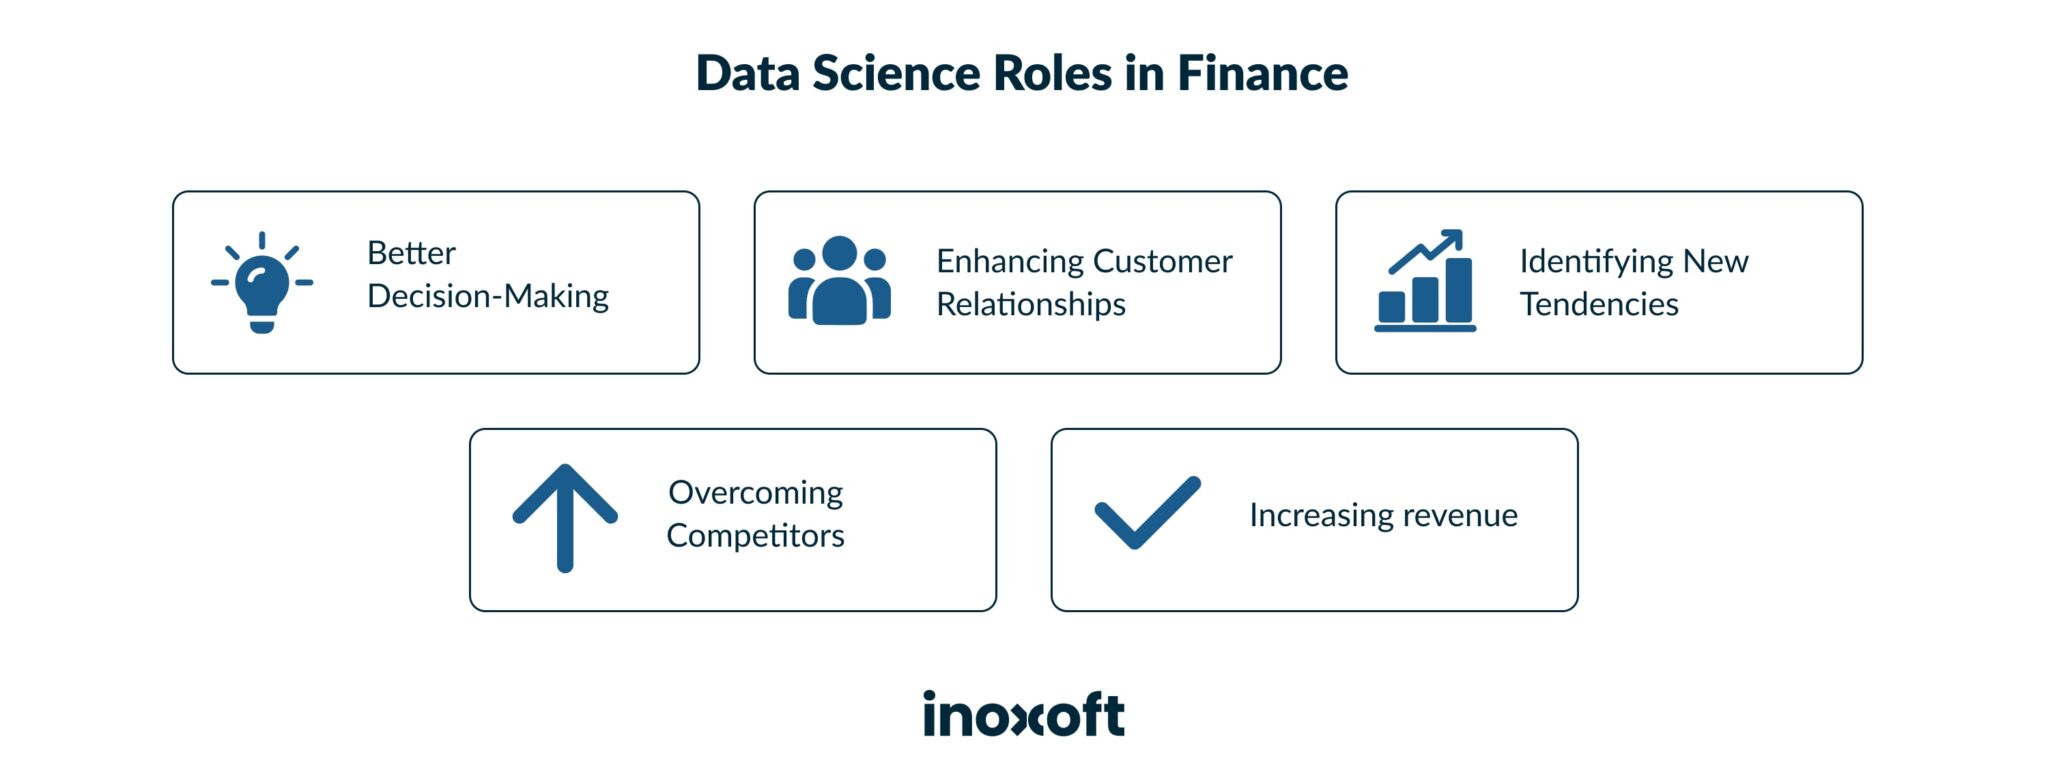 What are the roles of data science in Finance?